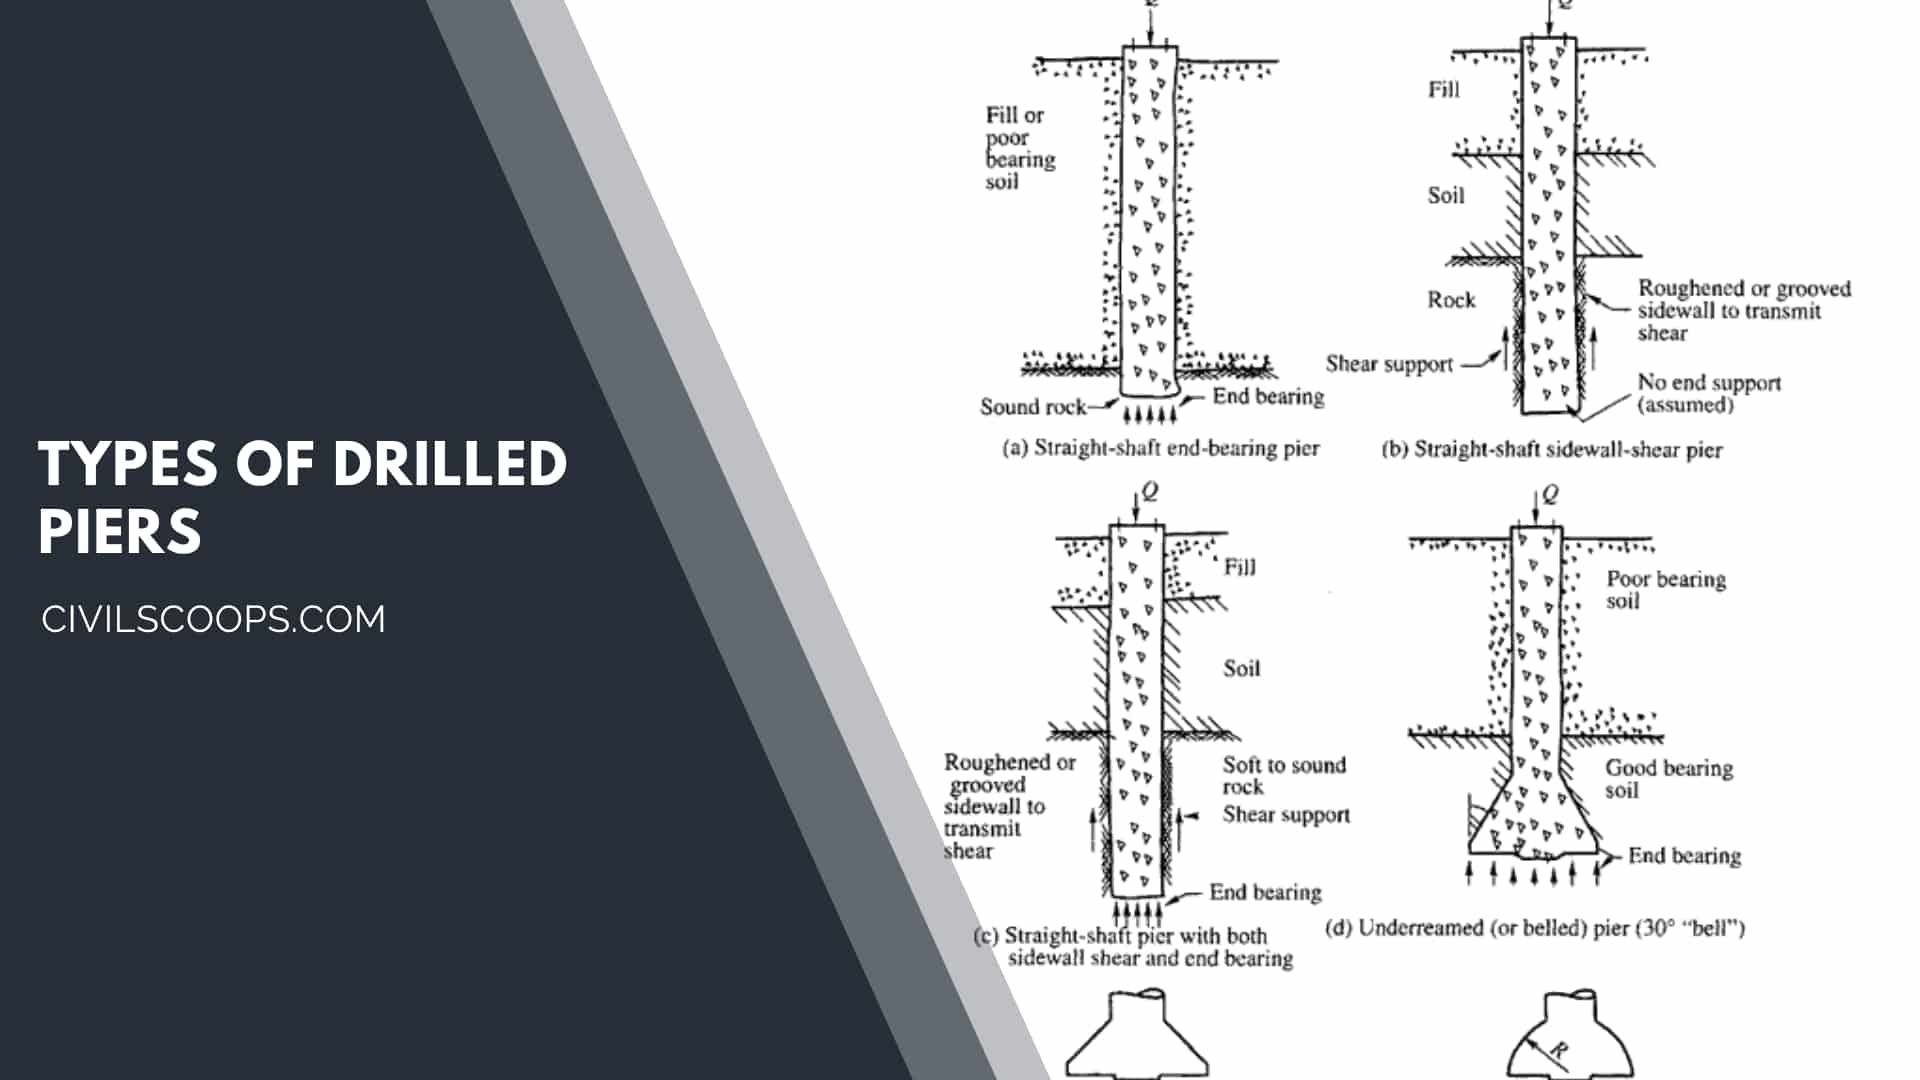 Types of Drilled Piers